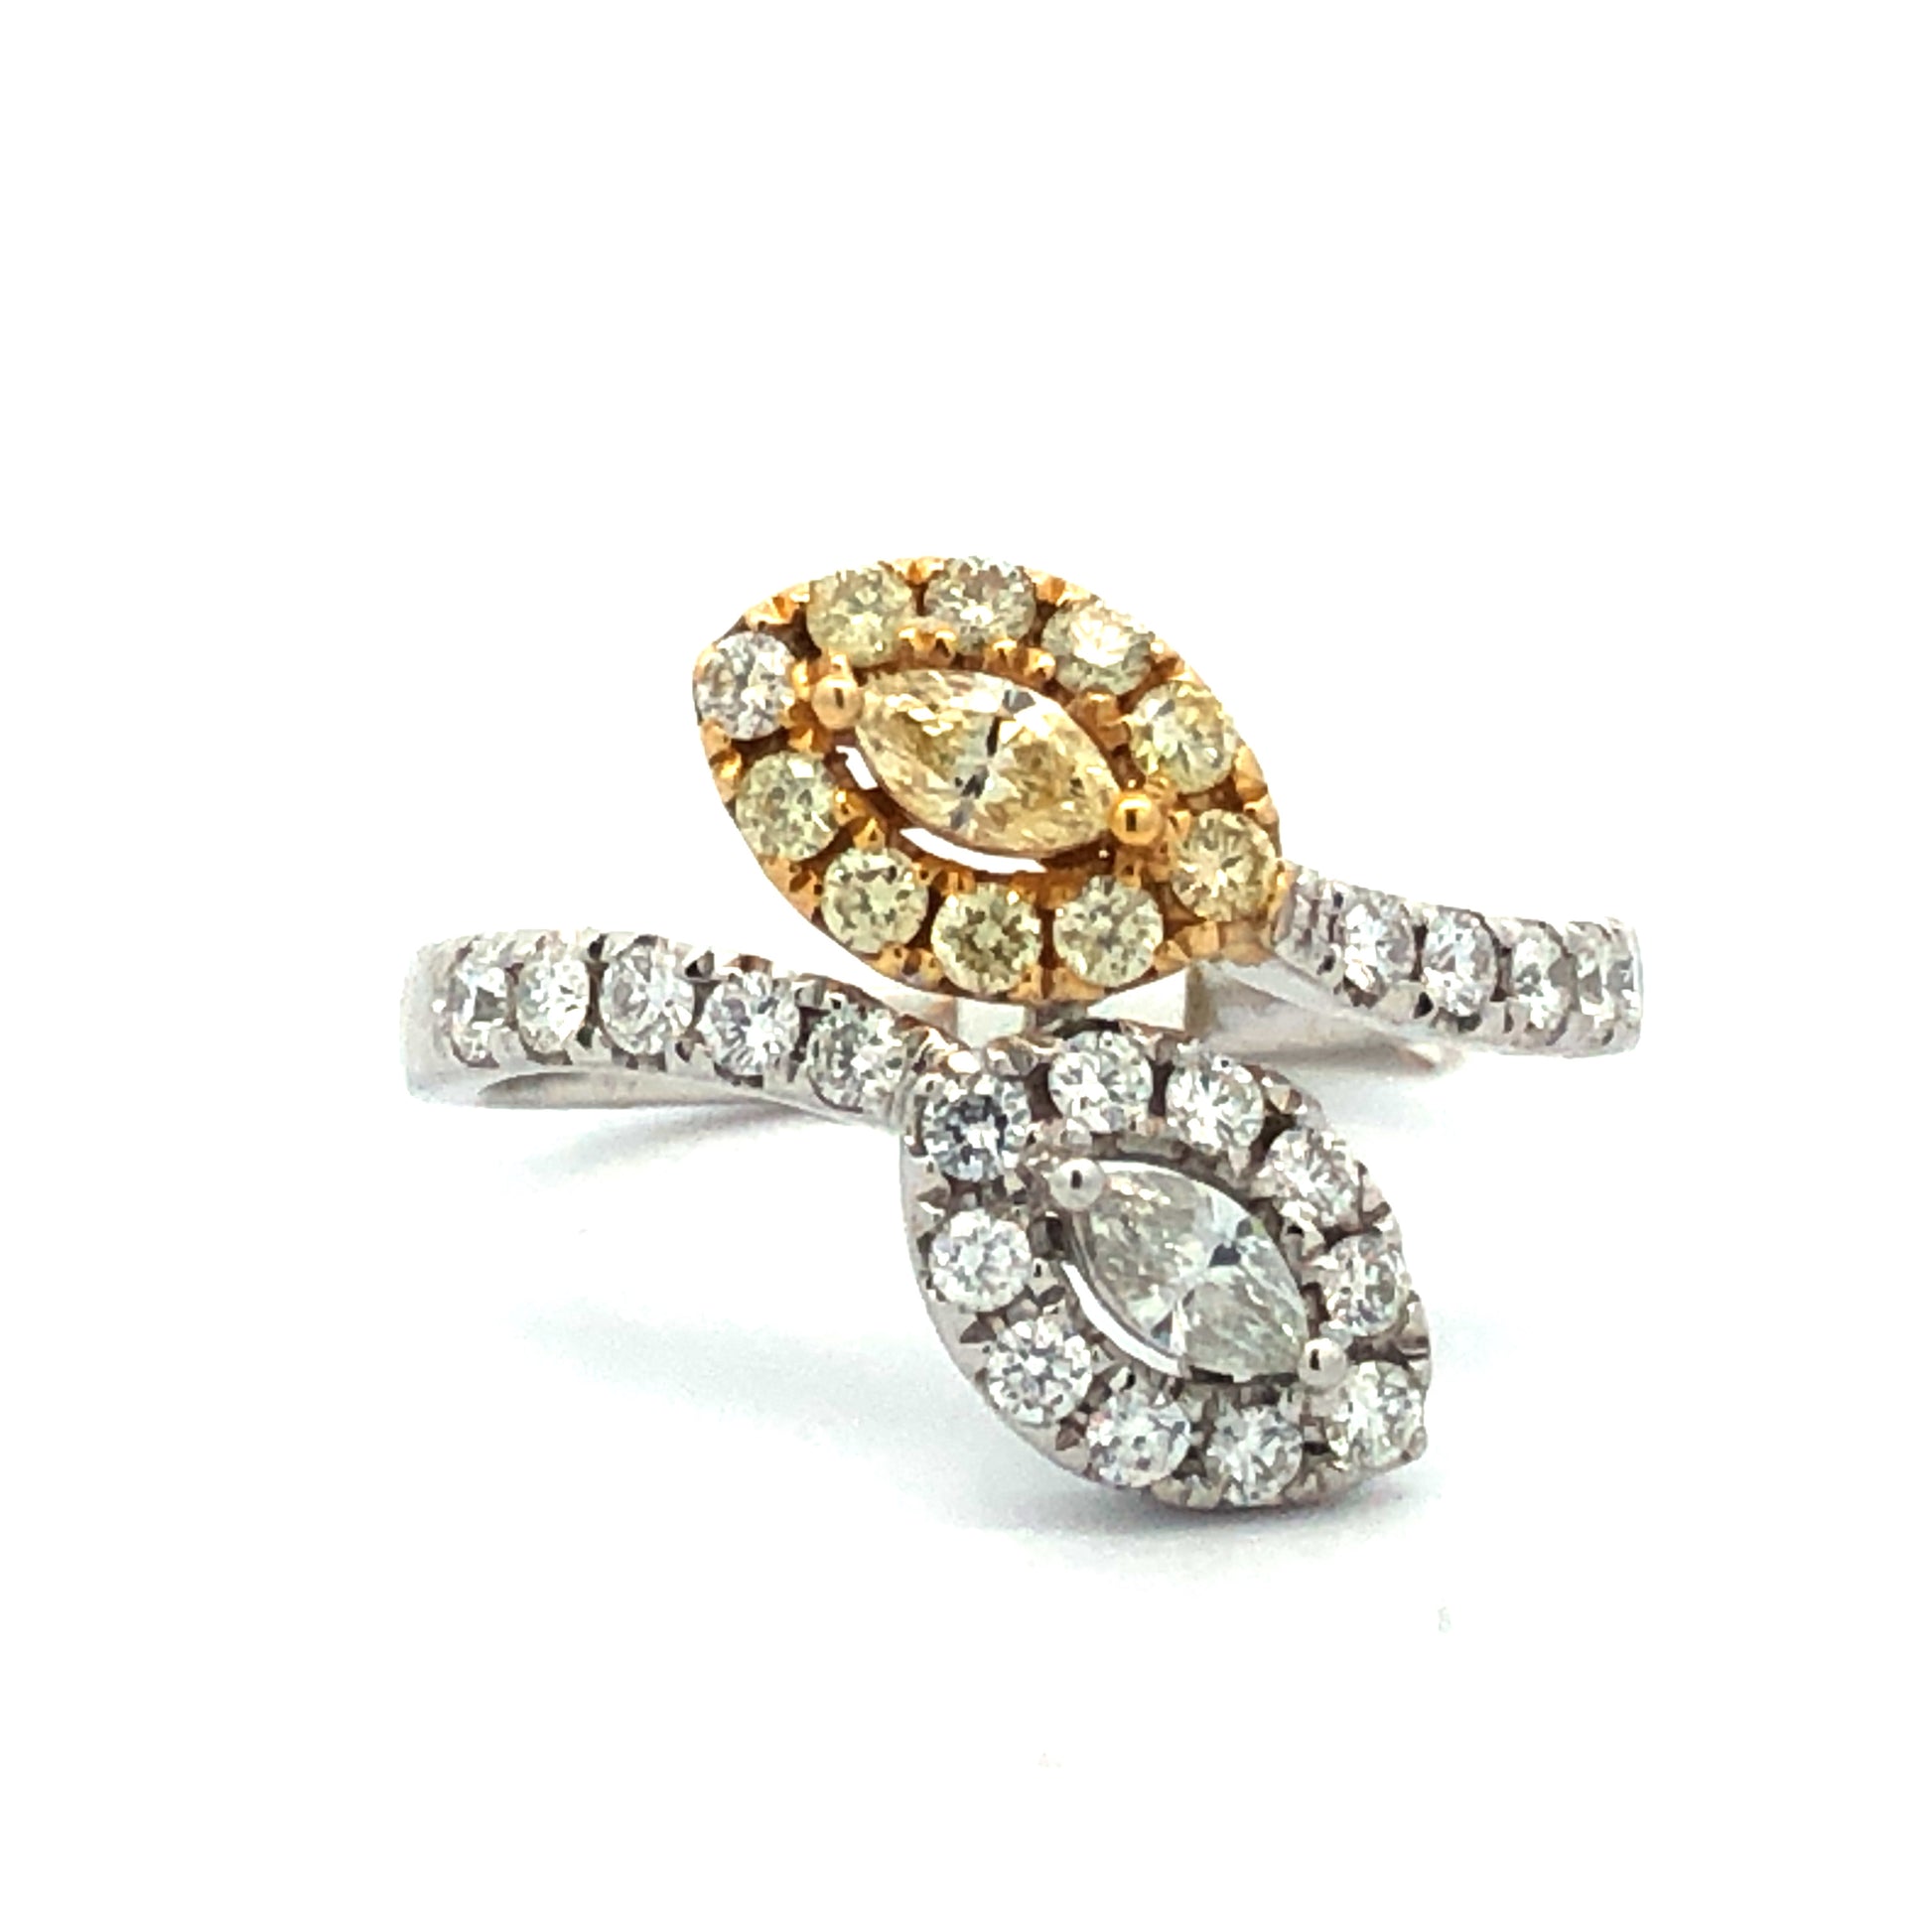 Yellow Diamond Ring R22216 - Royal Gems and Jewelry